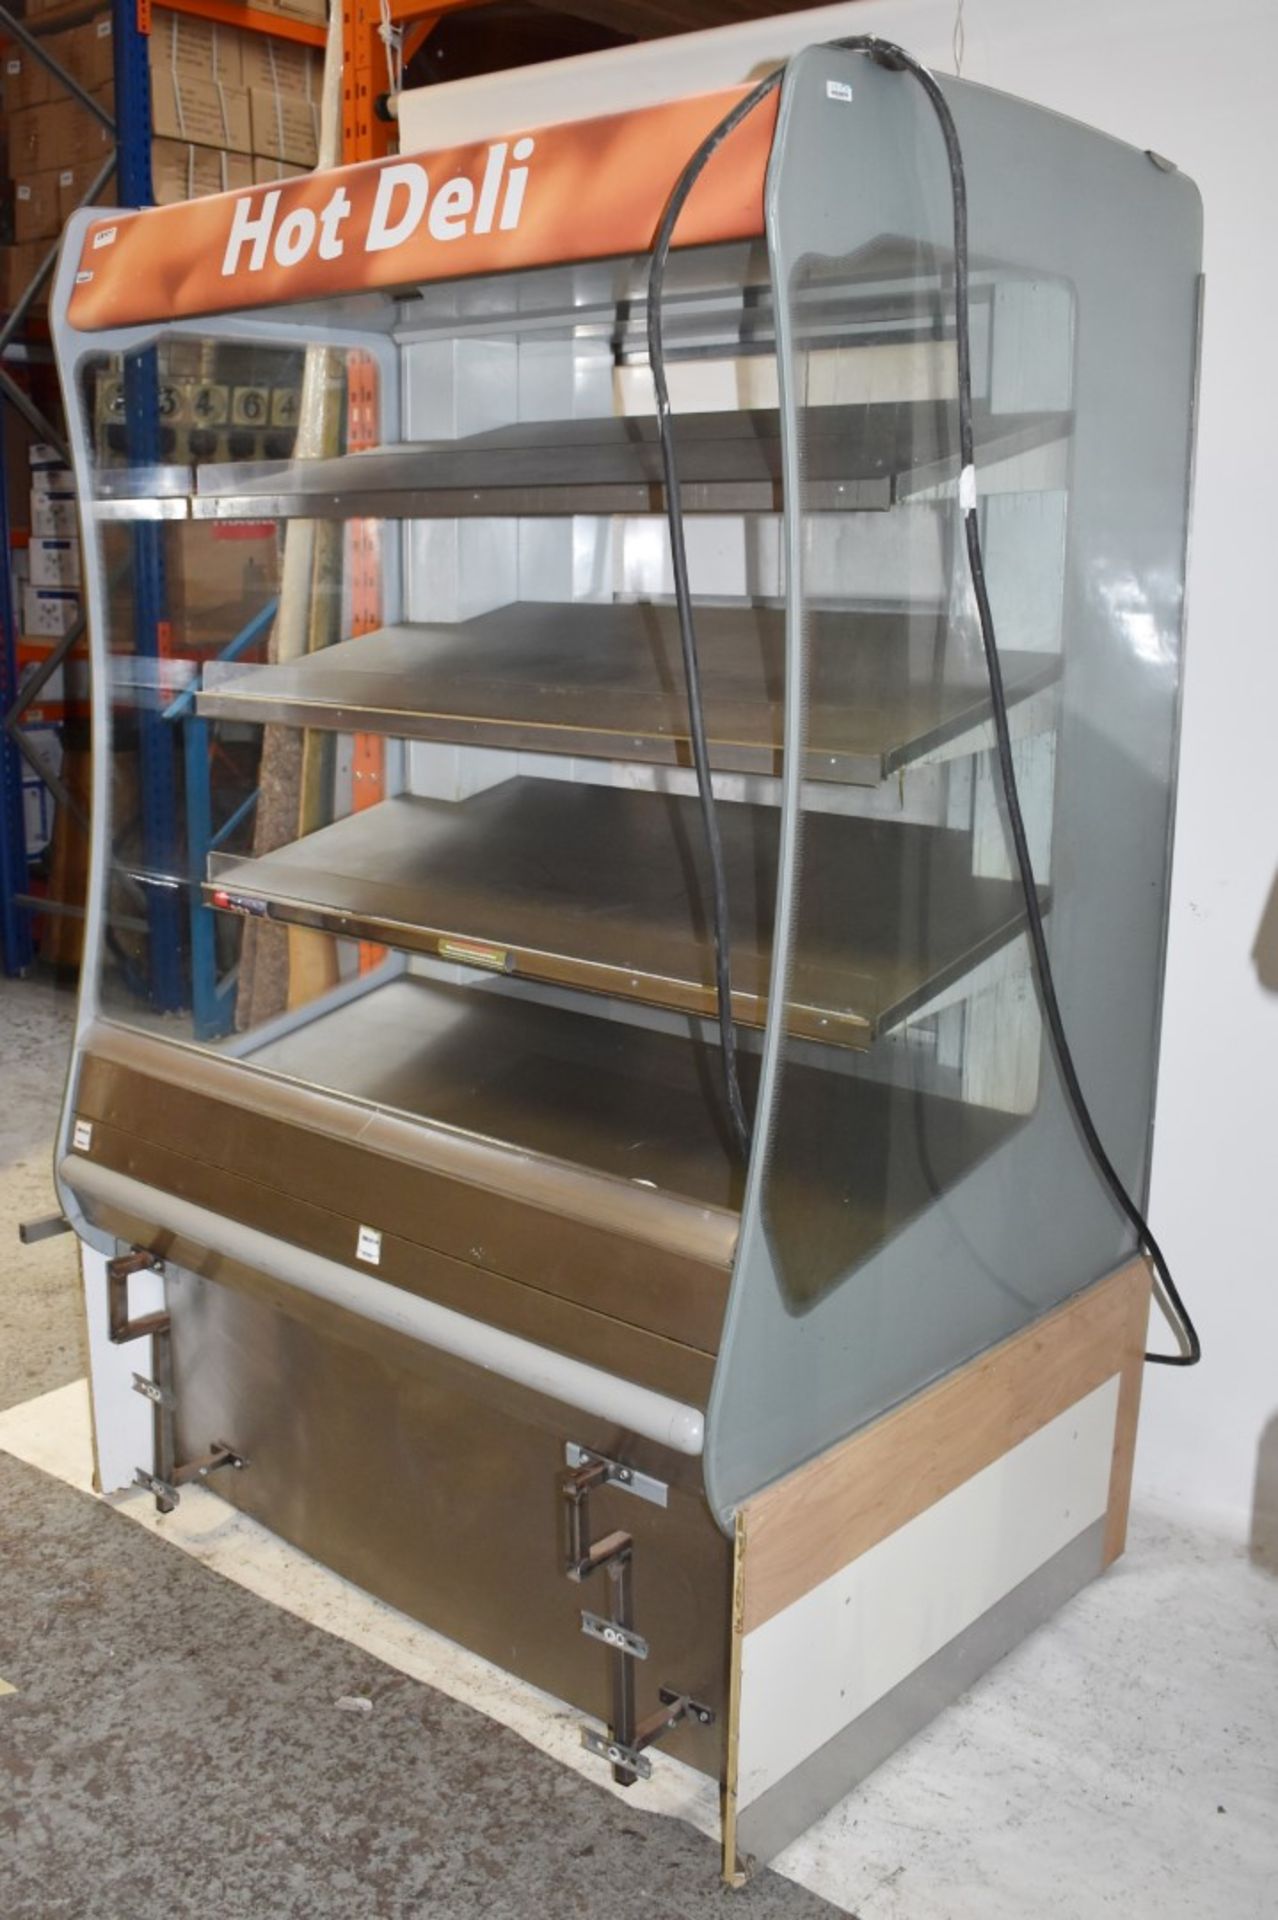 1 x BBQ King BKI MHC4 Hot Multi-tier Display Case/Heated Merchandiser Display Unit With Rear - Image 5 of 10